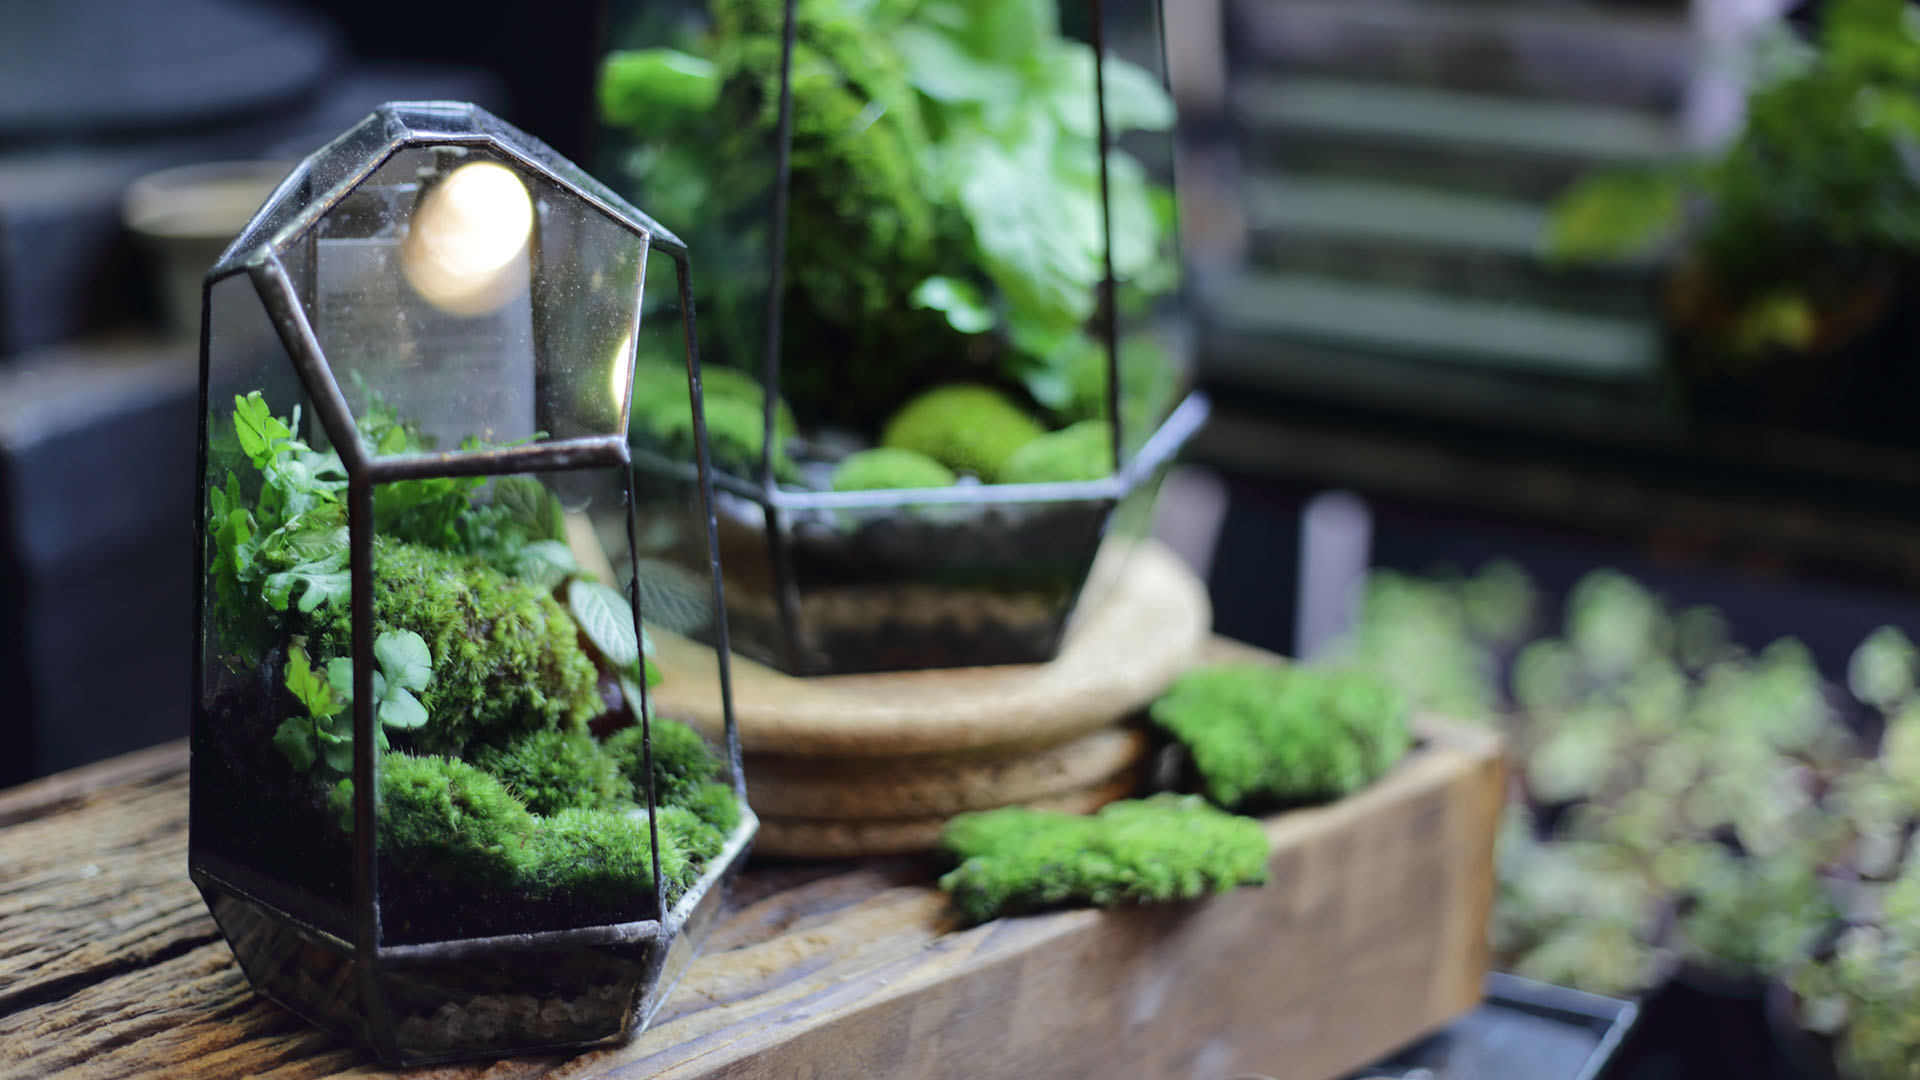 Terrarium small and little plants decorate in glass bottle